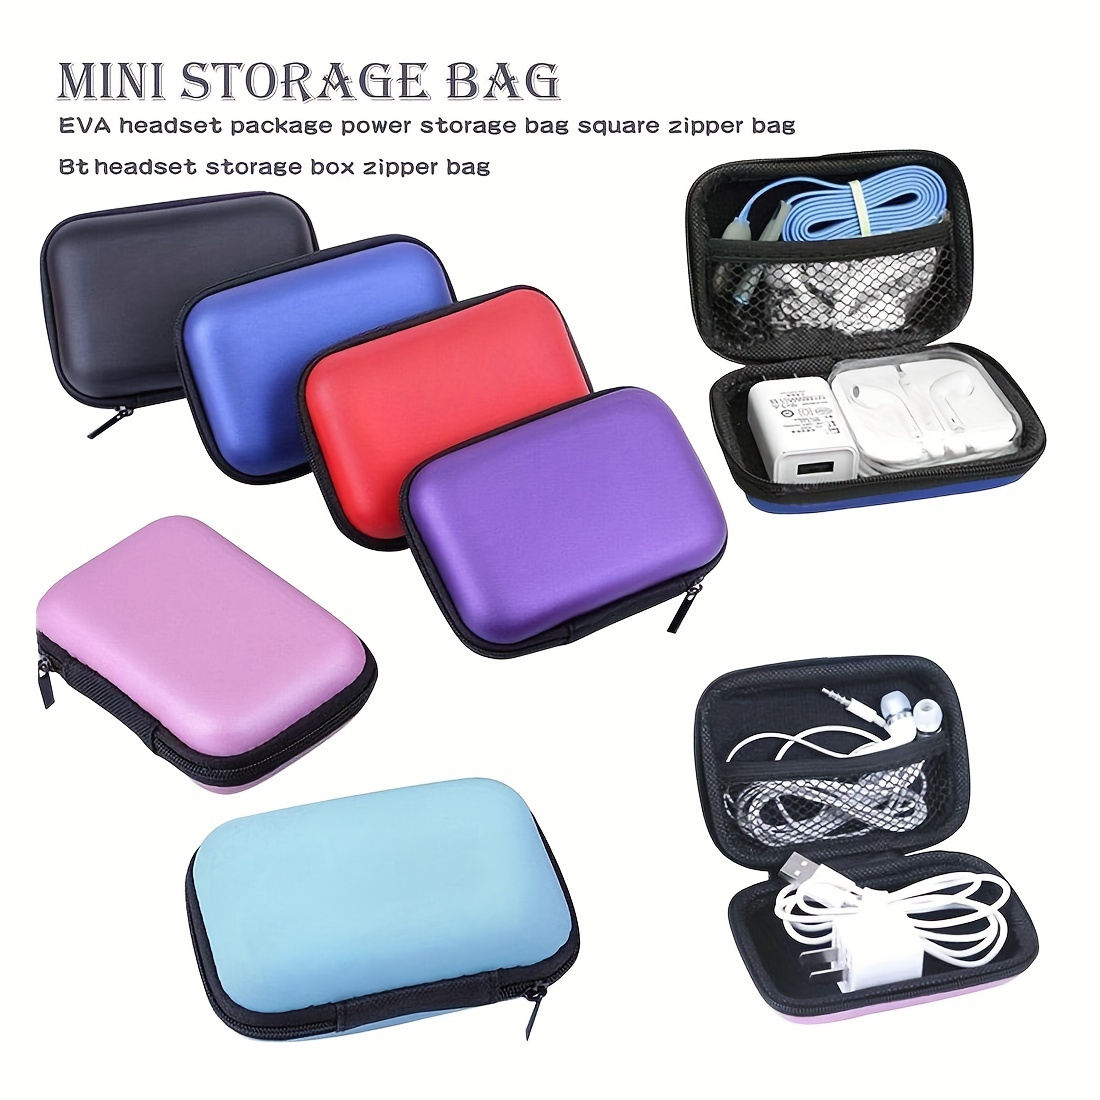 1pc Black Eva Mini Digital Accessories Storage Bag With Wrist Strap,  Compatible With Usb, Wireless Earphones, Data Cables For Organization